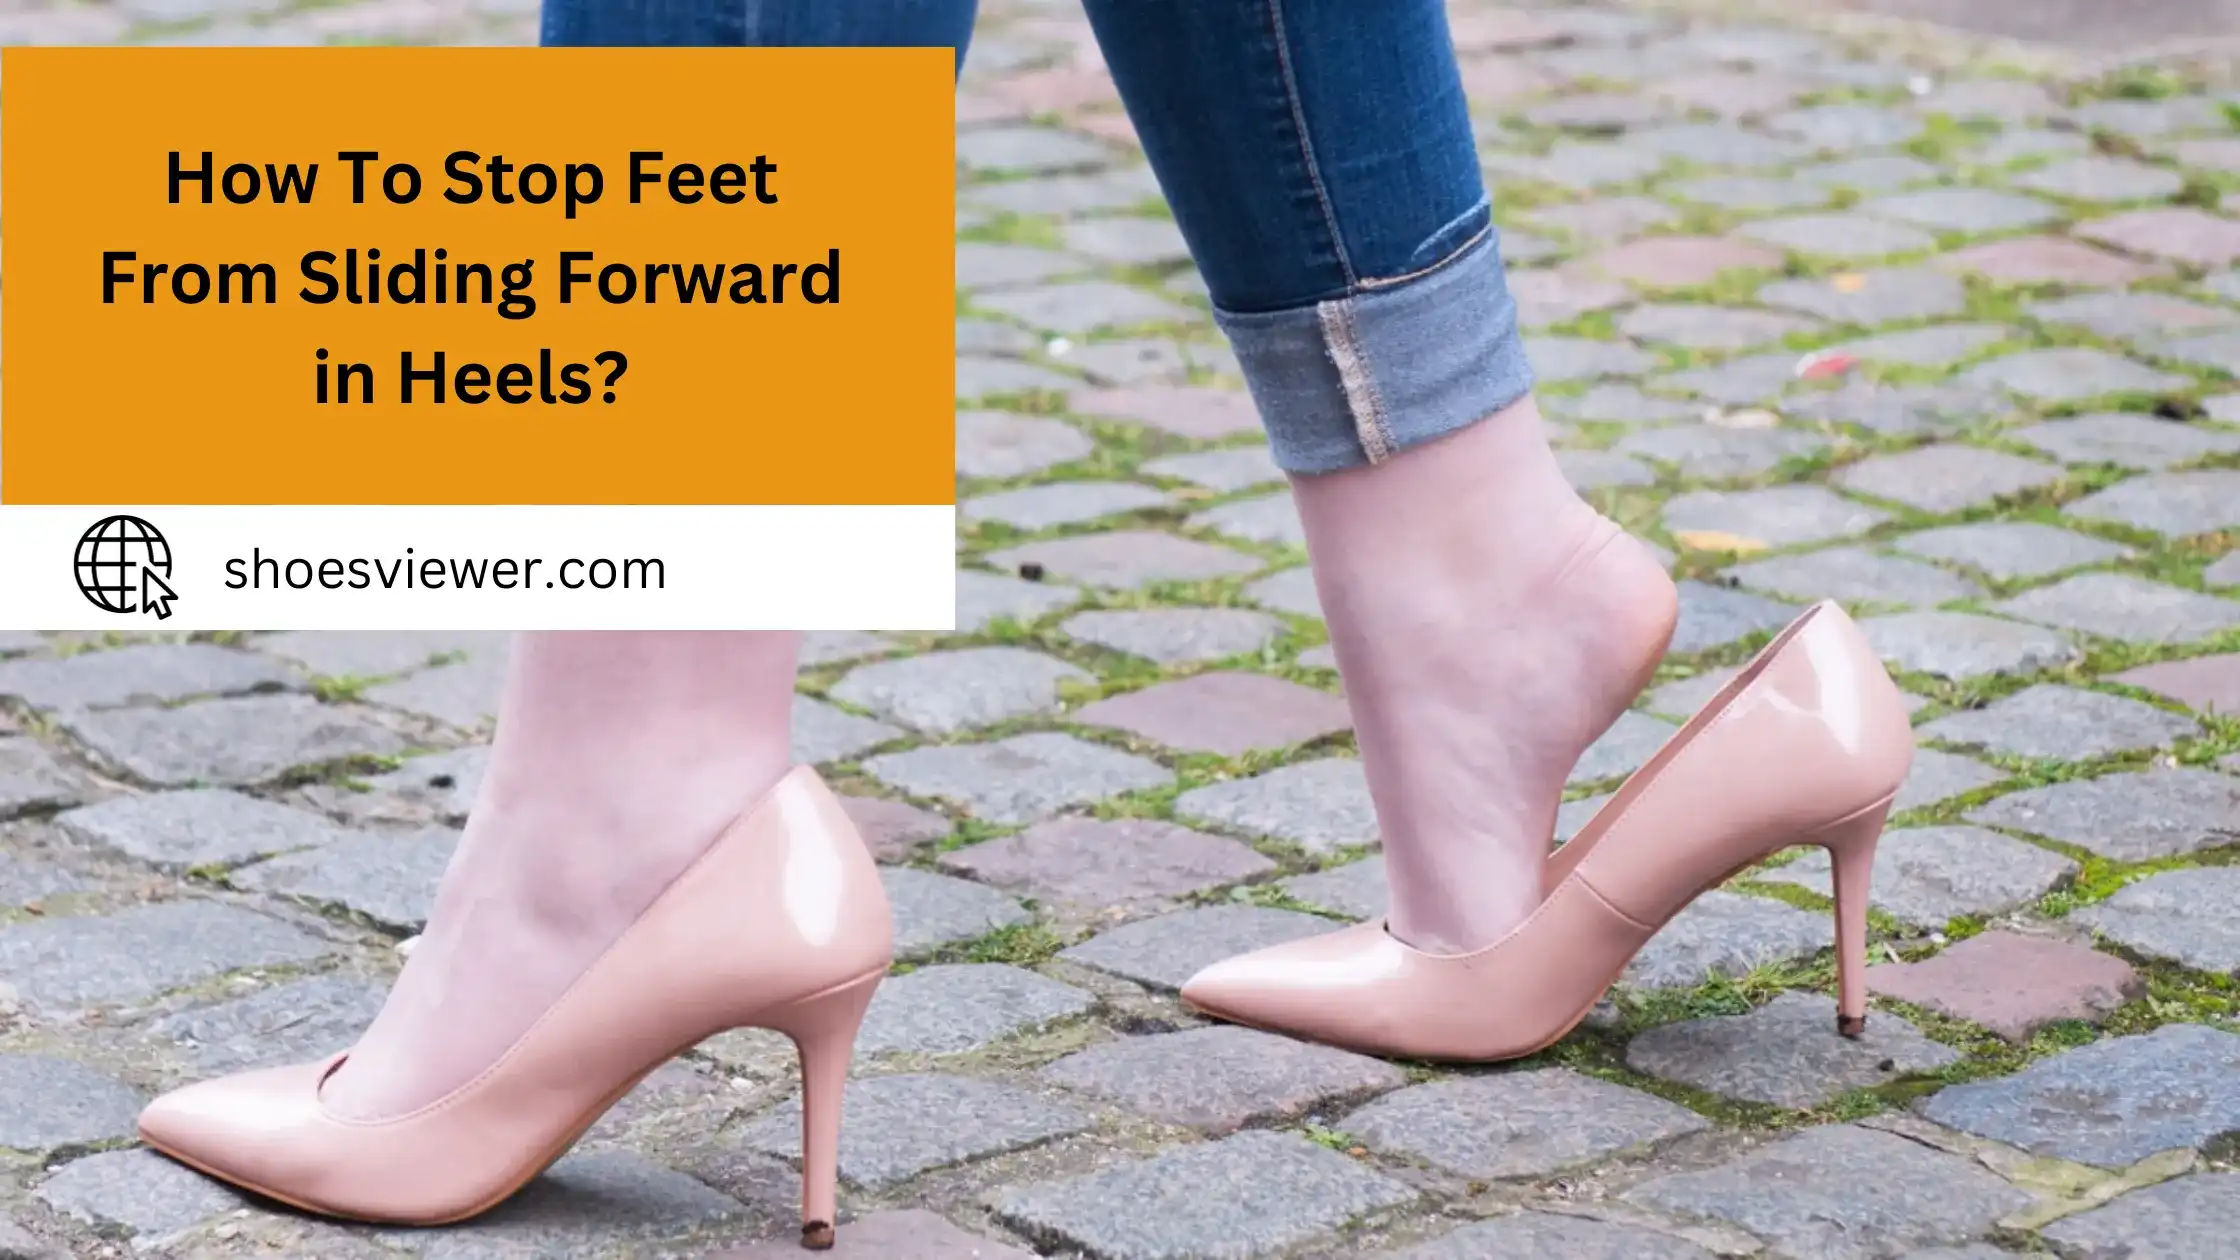 How To Stop Feet From Sliding Forward in Heels? Easy Guide